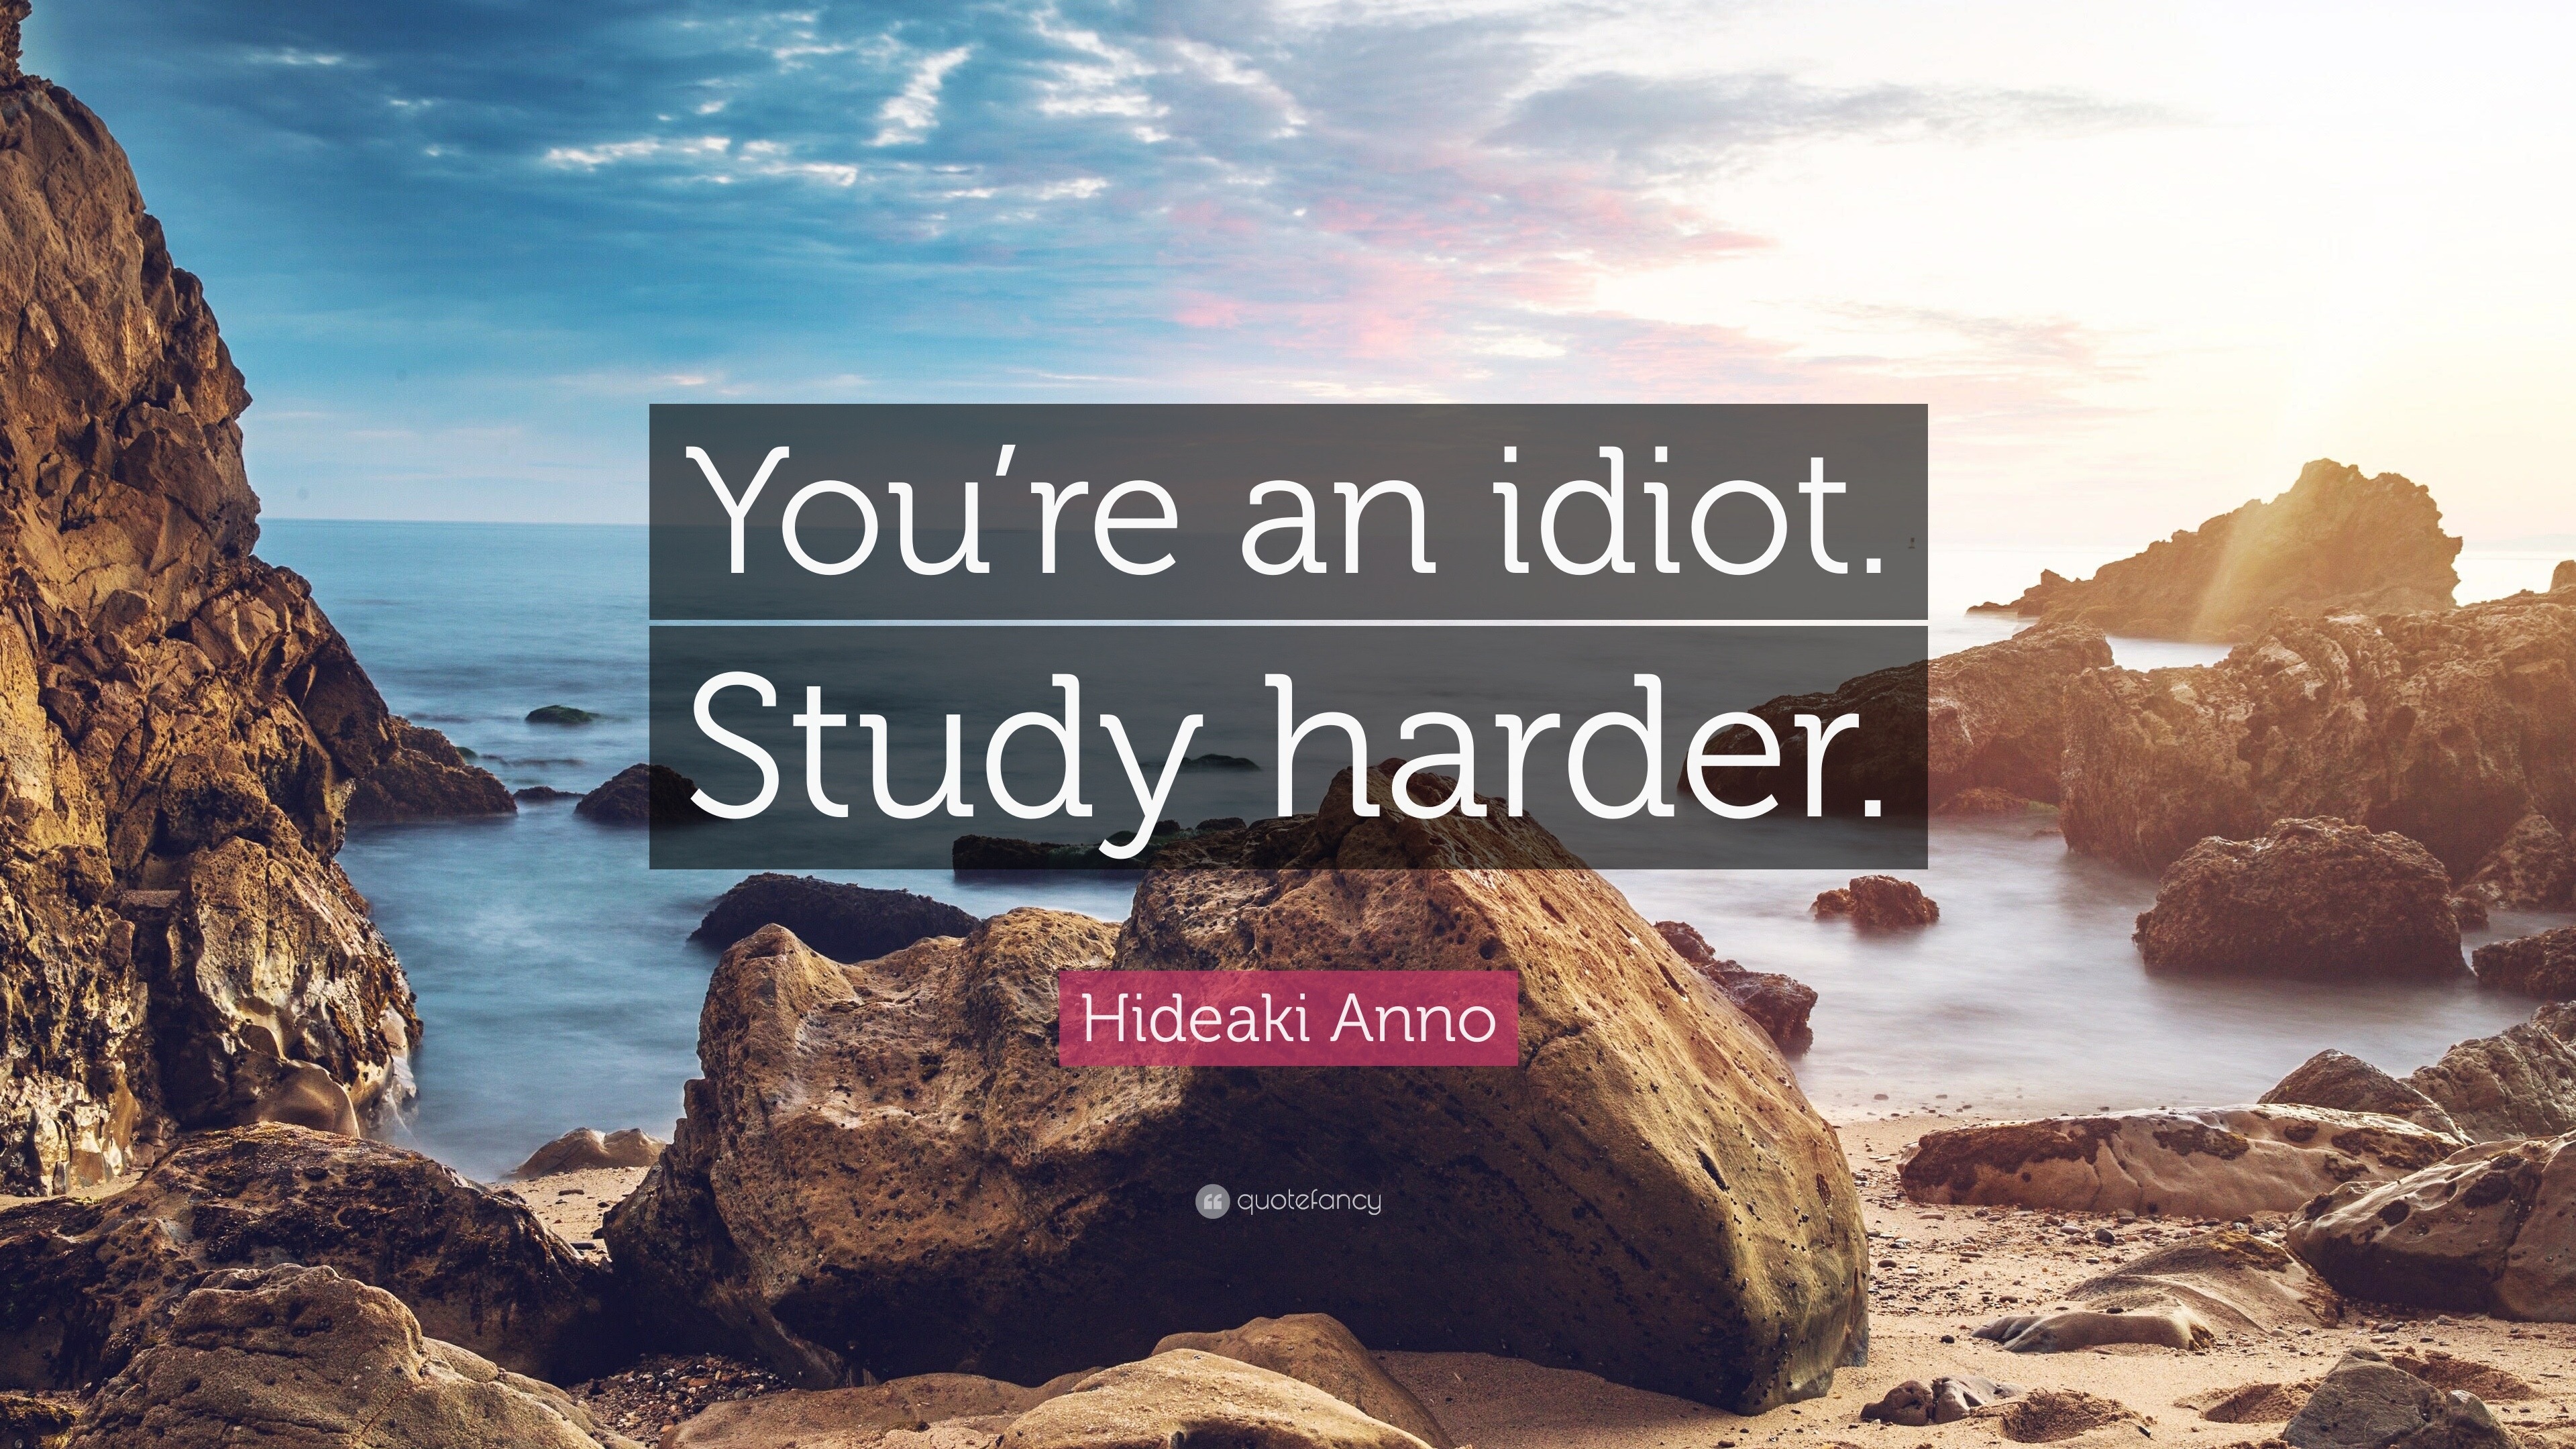 Hideaki Anno Quote: “You're an idiot. Study harder.”